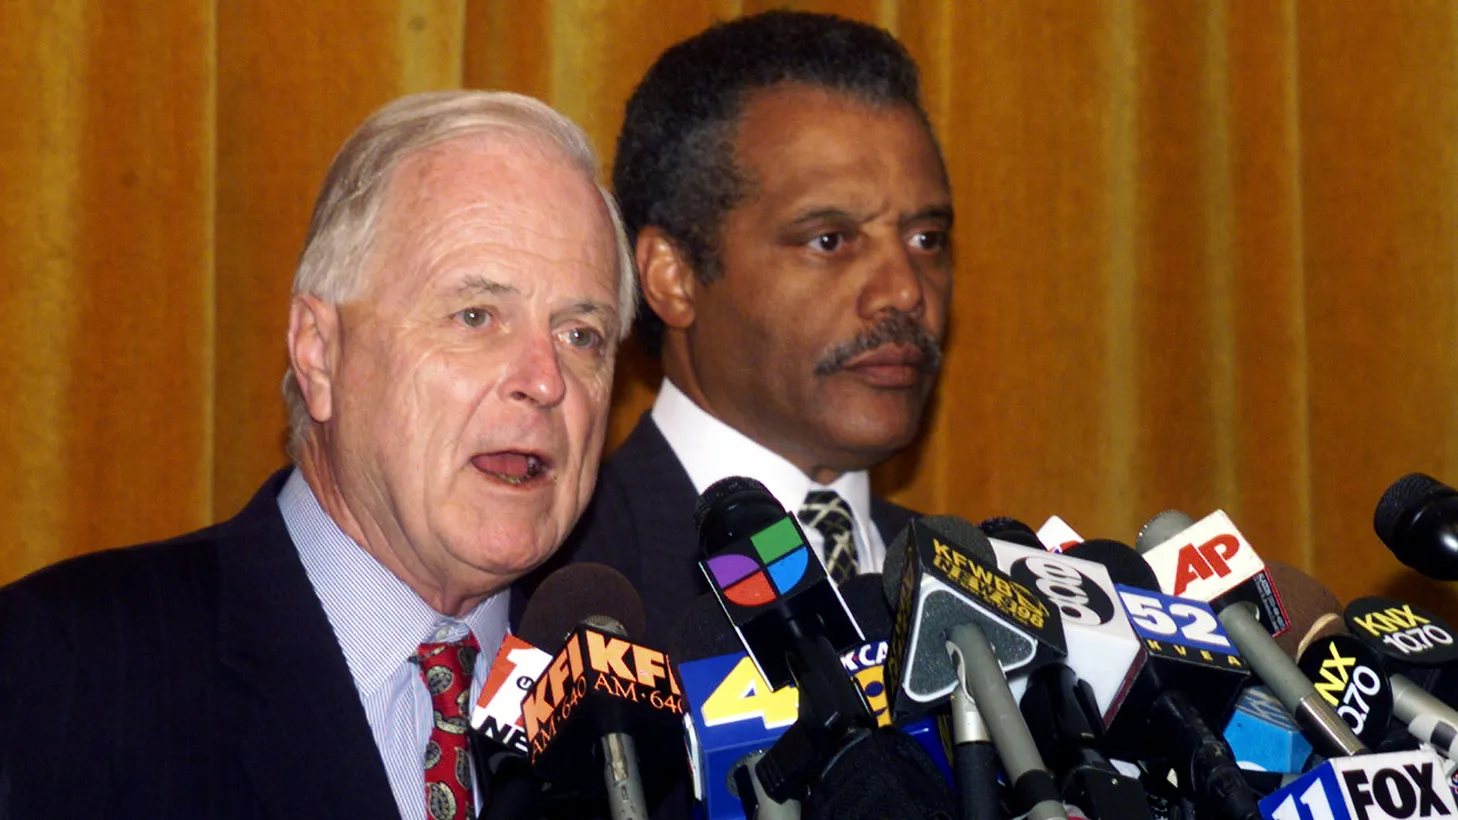 Los Angeles Mayor Richard Riordan (L) speaks to reporters with Los Angeles Police Chief Bernard Parks (R) during a news conference at police headquarters in Los Angeles, August 1999.